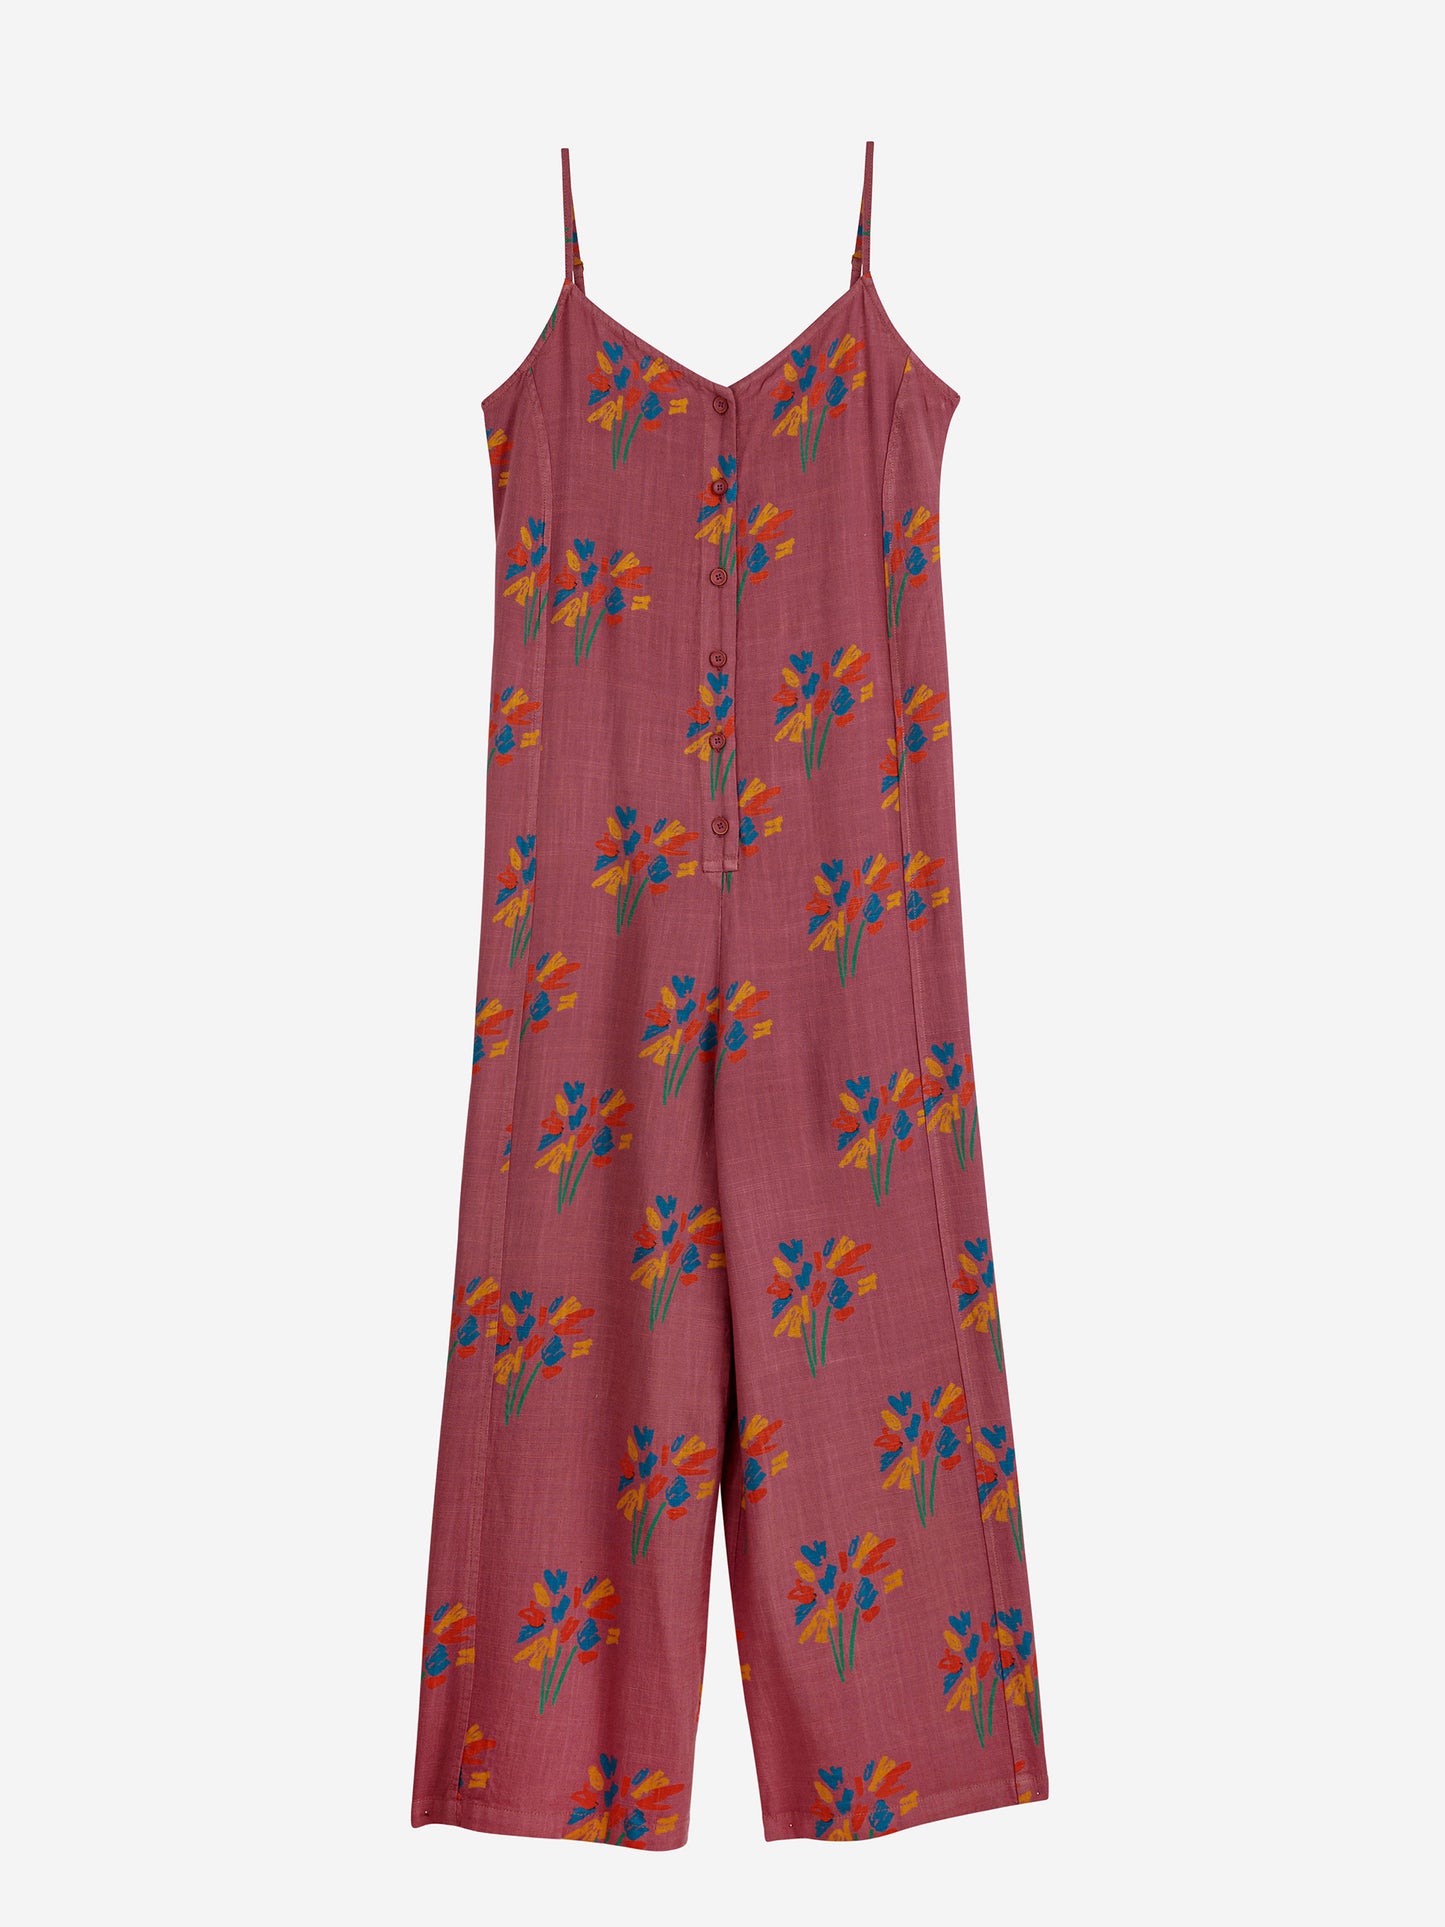 Fireworks print overall